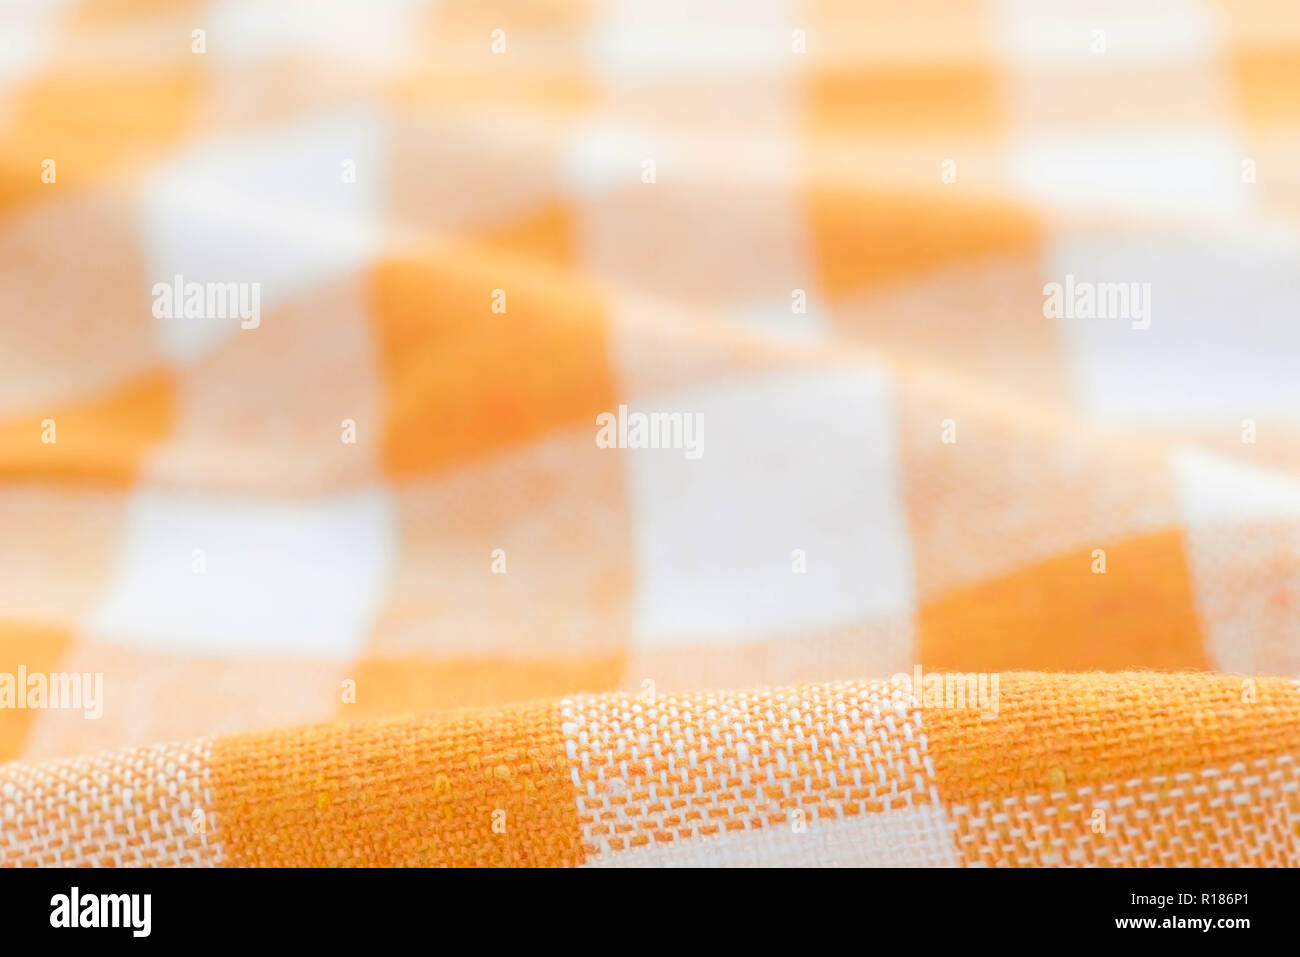 Kitchen Rag Of Orange Color On A White Bottom Stock Photo, Picture and  Royalty Free Image. Image 11792173.